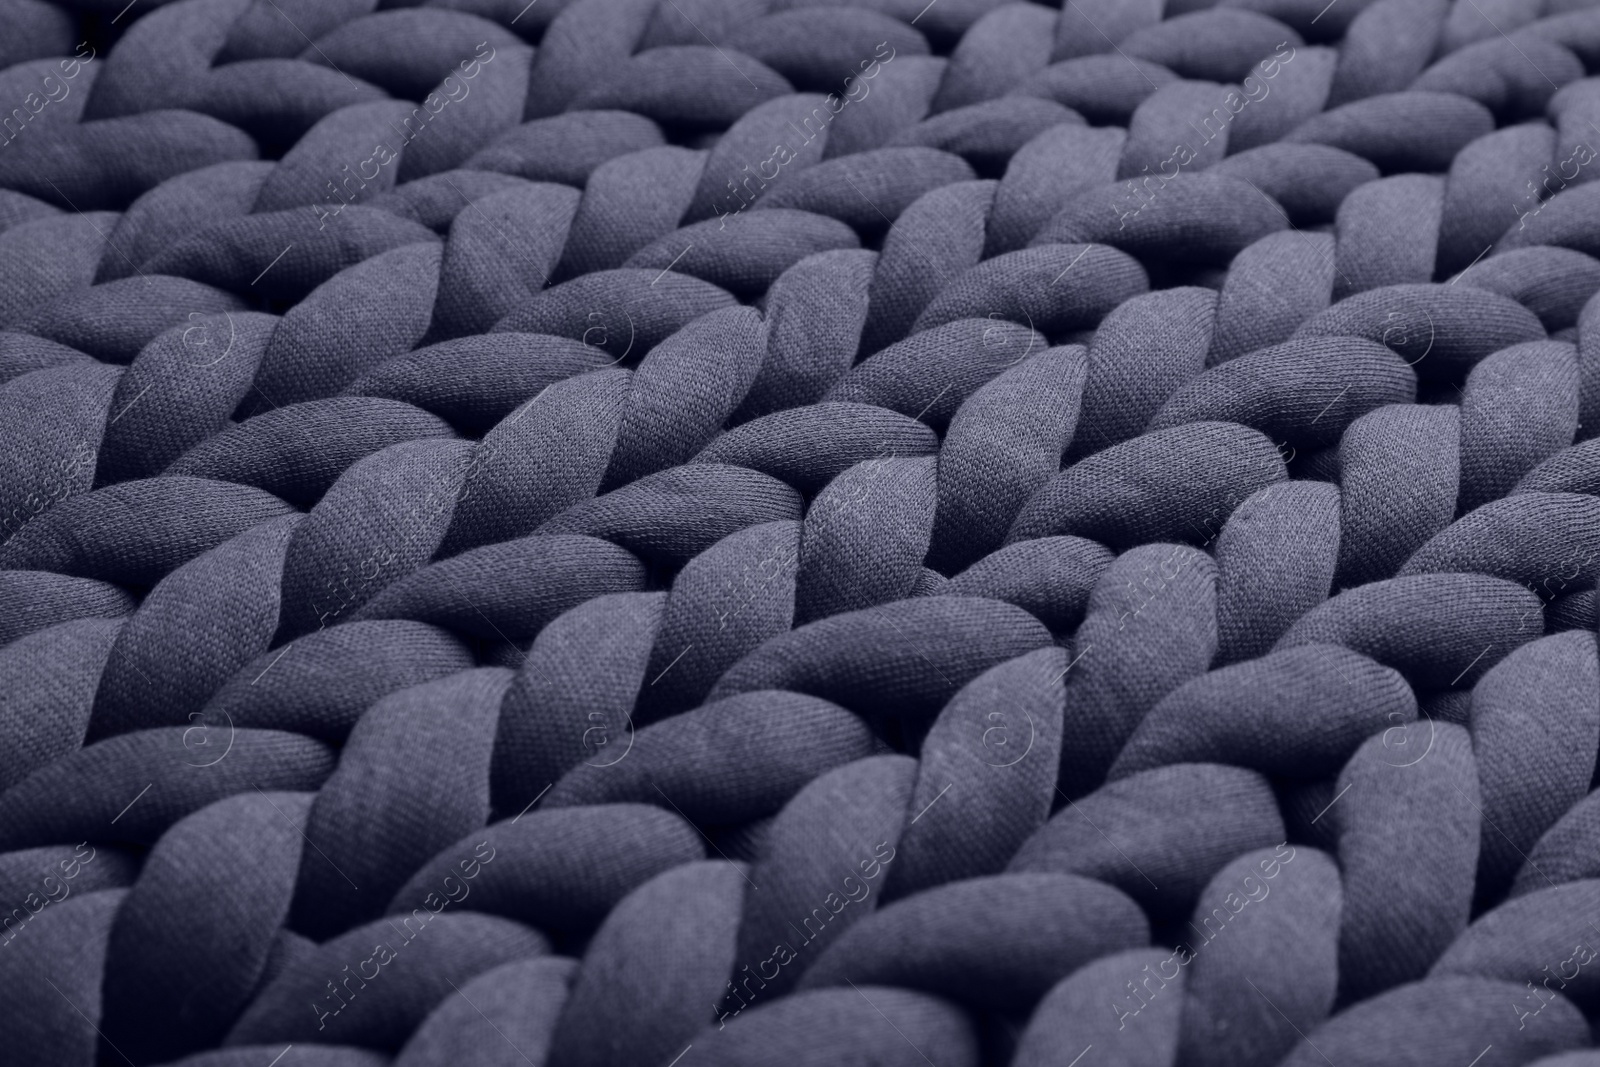 Photo of Closeup view of grey chunky knit blanket as background